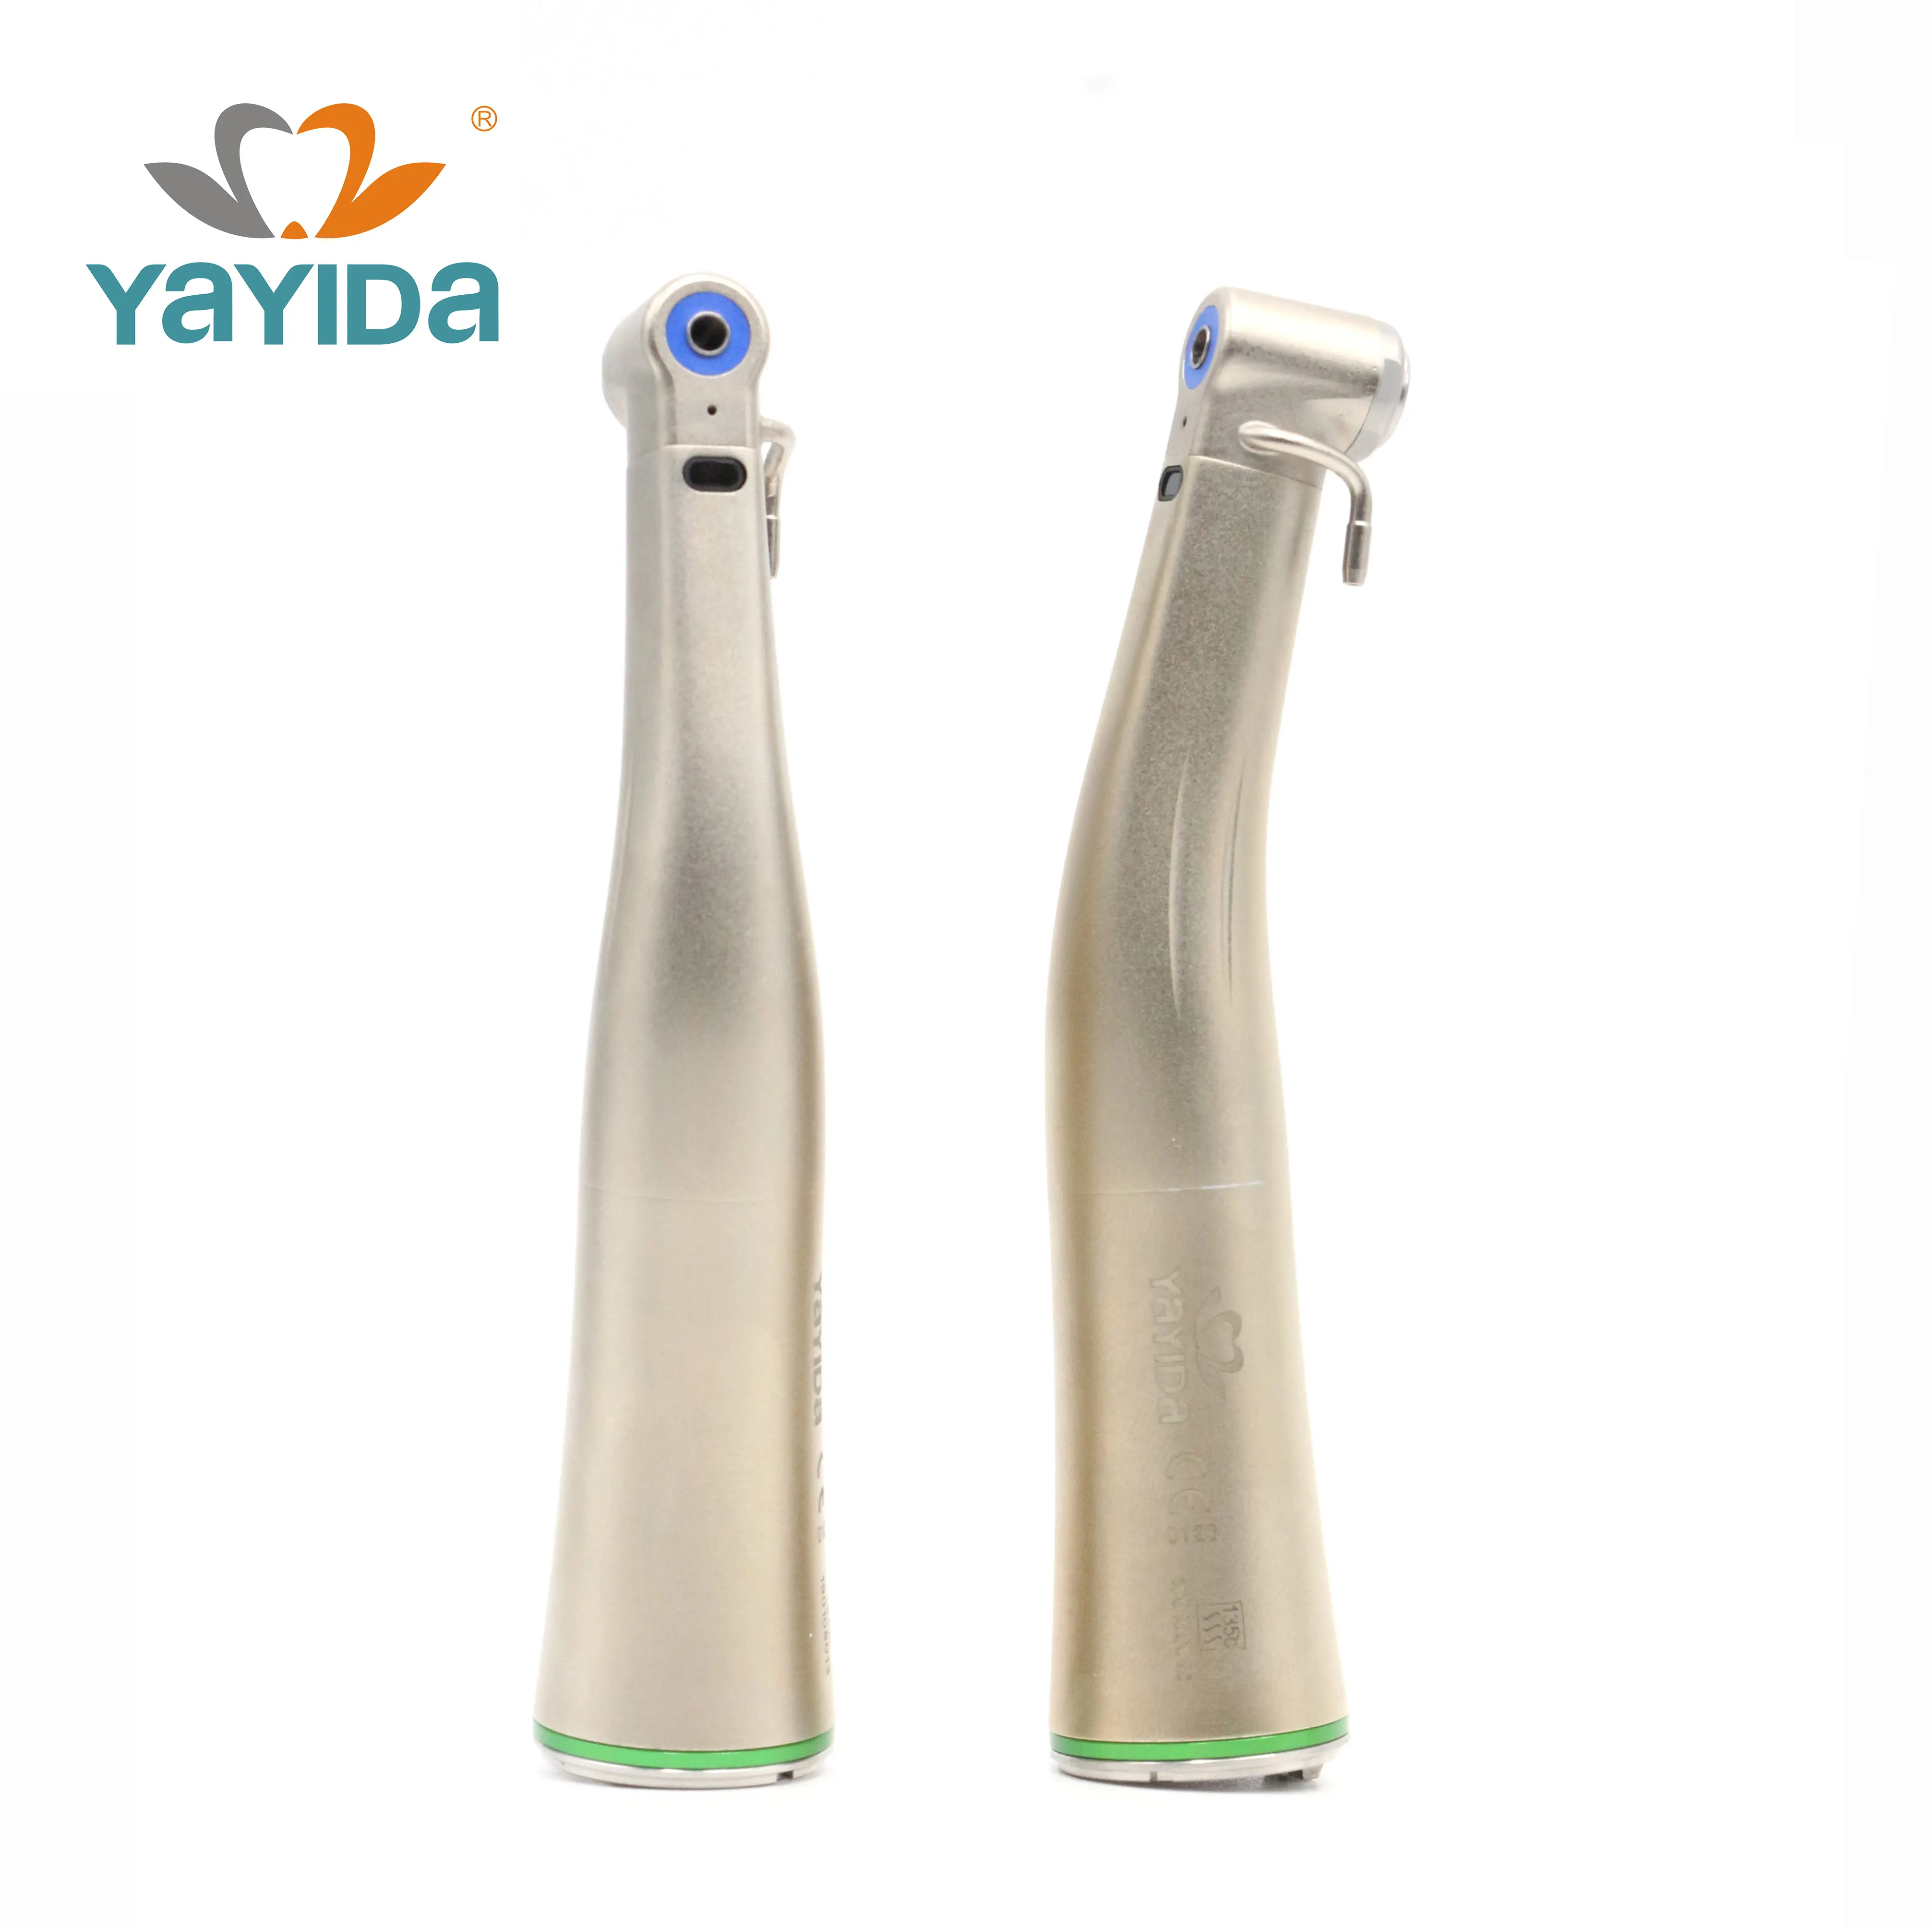 N-SK type Ti-Max XSG20L 20:1 contra angle low speed handpiece with fiber optic for dental implant motor